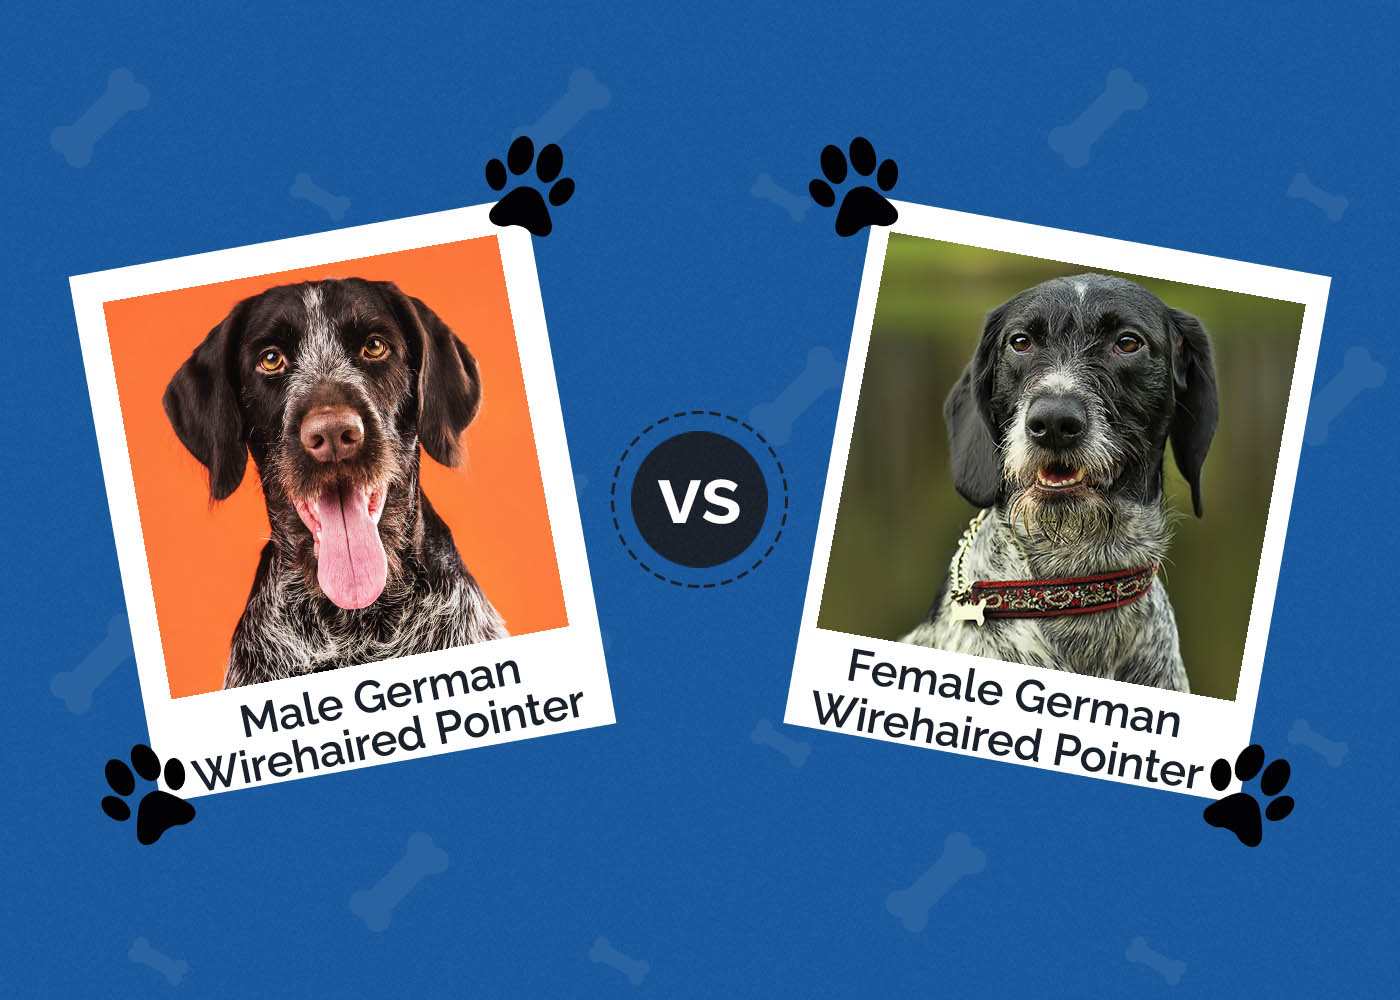 Male vs Female German Wirehaired Pointer